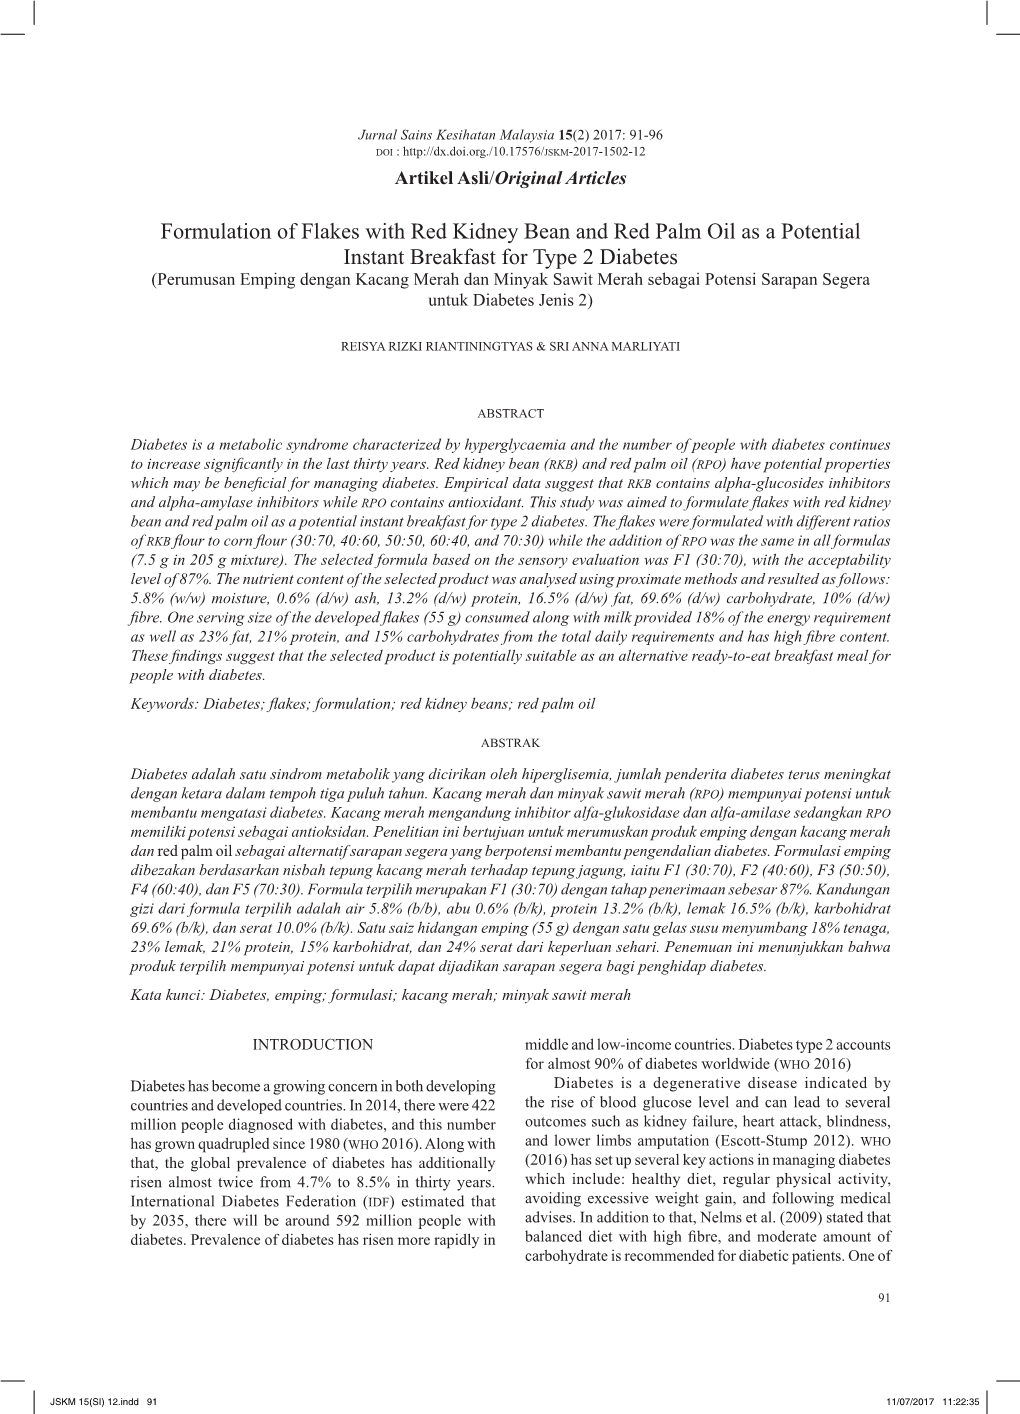 Formulation of Flakes with Red Kidney Bean and Red Palm Oil As A